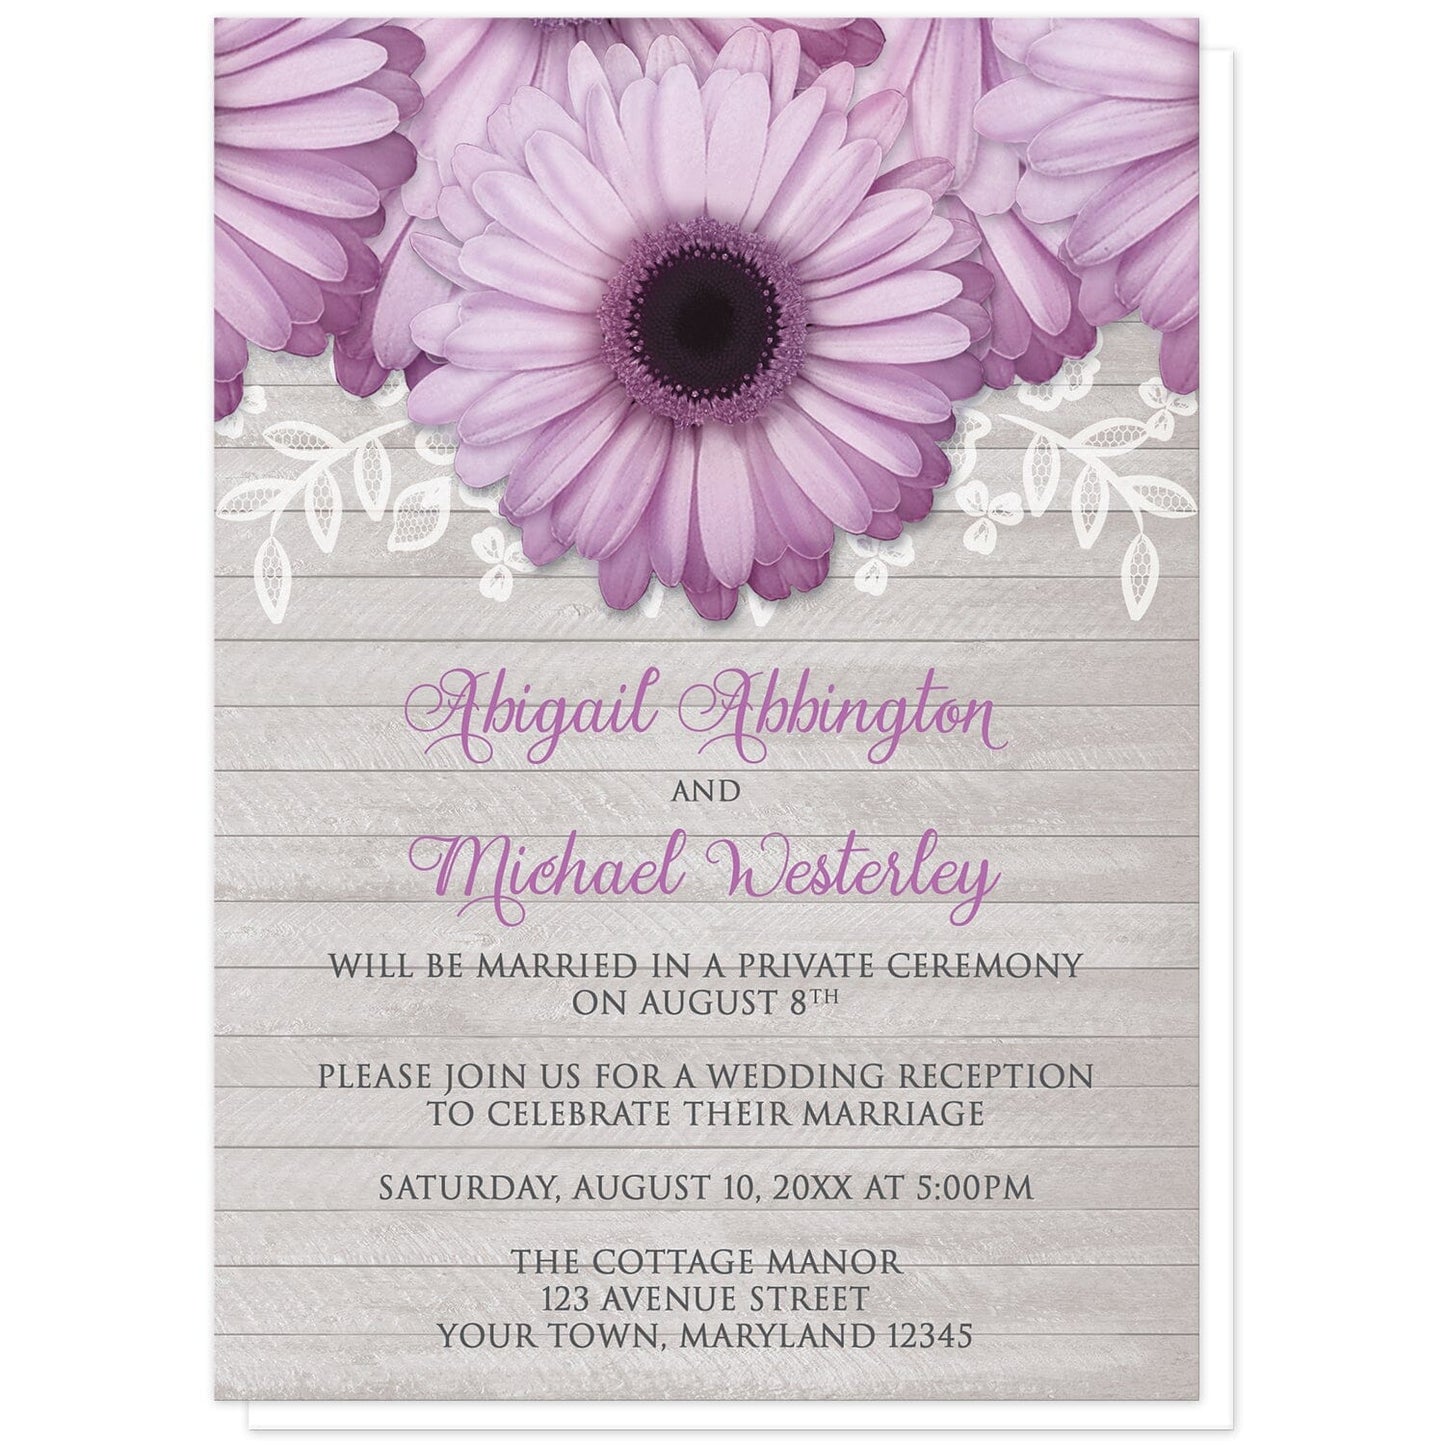 Rustic Purple Daisy Gray Wood Reception Only Invitations at Artistically Invited. Rustic purple daisy gray wood reception only invitations designed with large and lovely purple daisy flowers with a white lace overlay along the top over a light gray wood background illustration. Your personalized post-wedding reception details are custom printed in purple and dark gray over the wood background design below the pretty purple daisies.